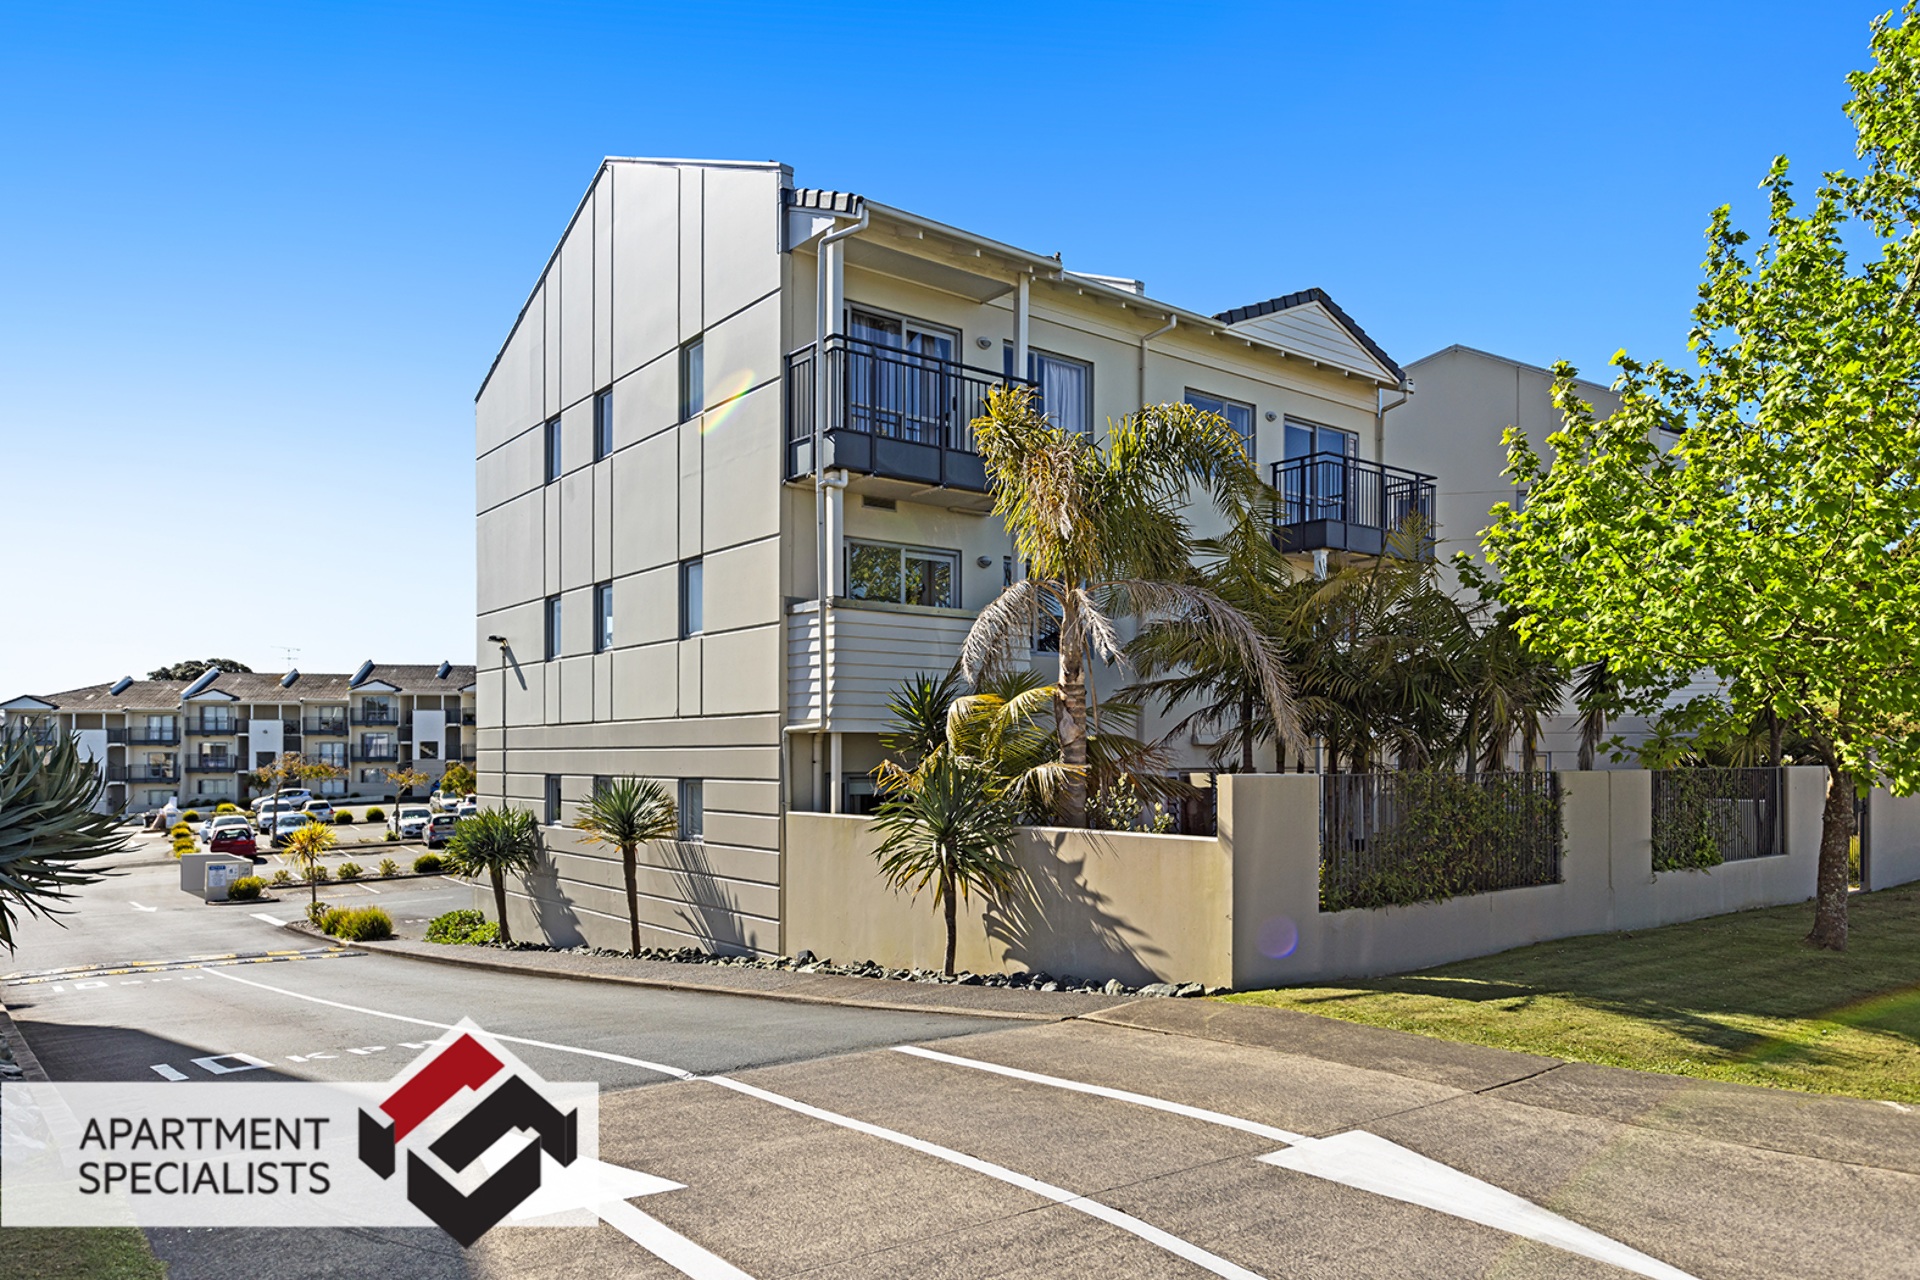 20 | 71 Spencer Road, Albany | Apartment Specialists